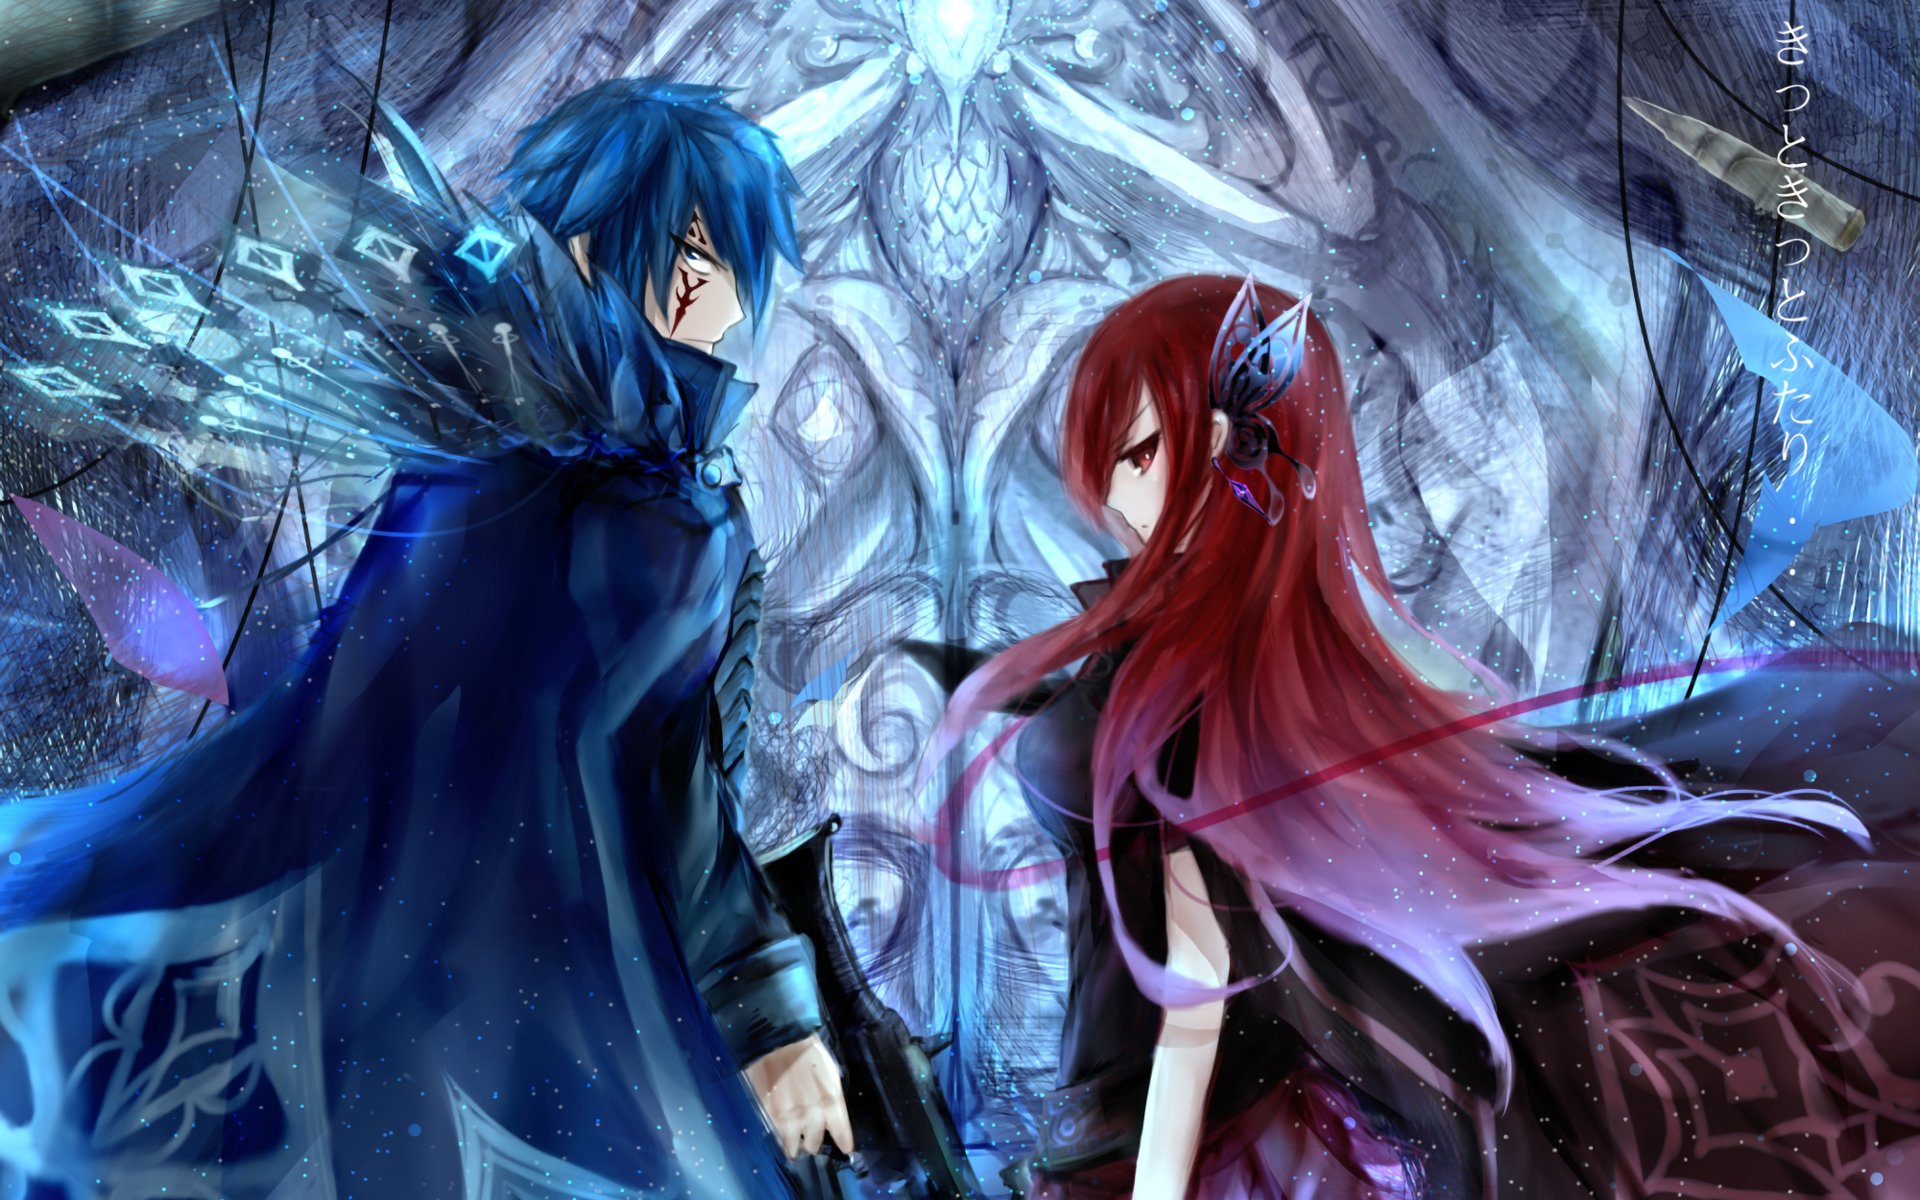 Fairy tail gerard and erza